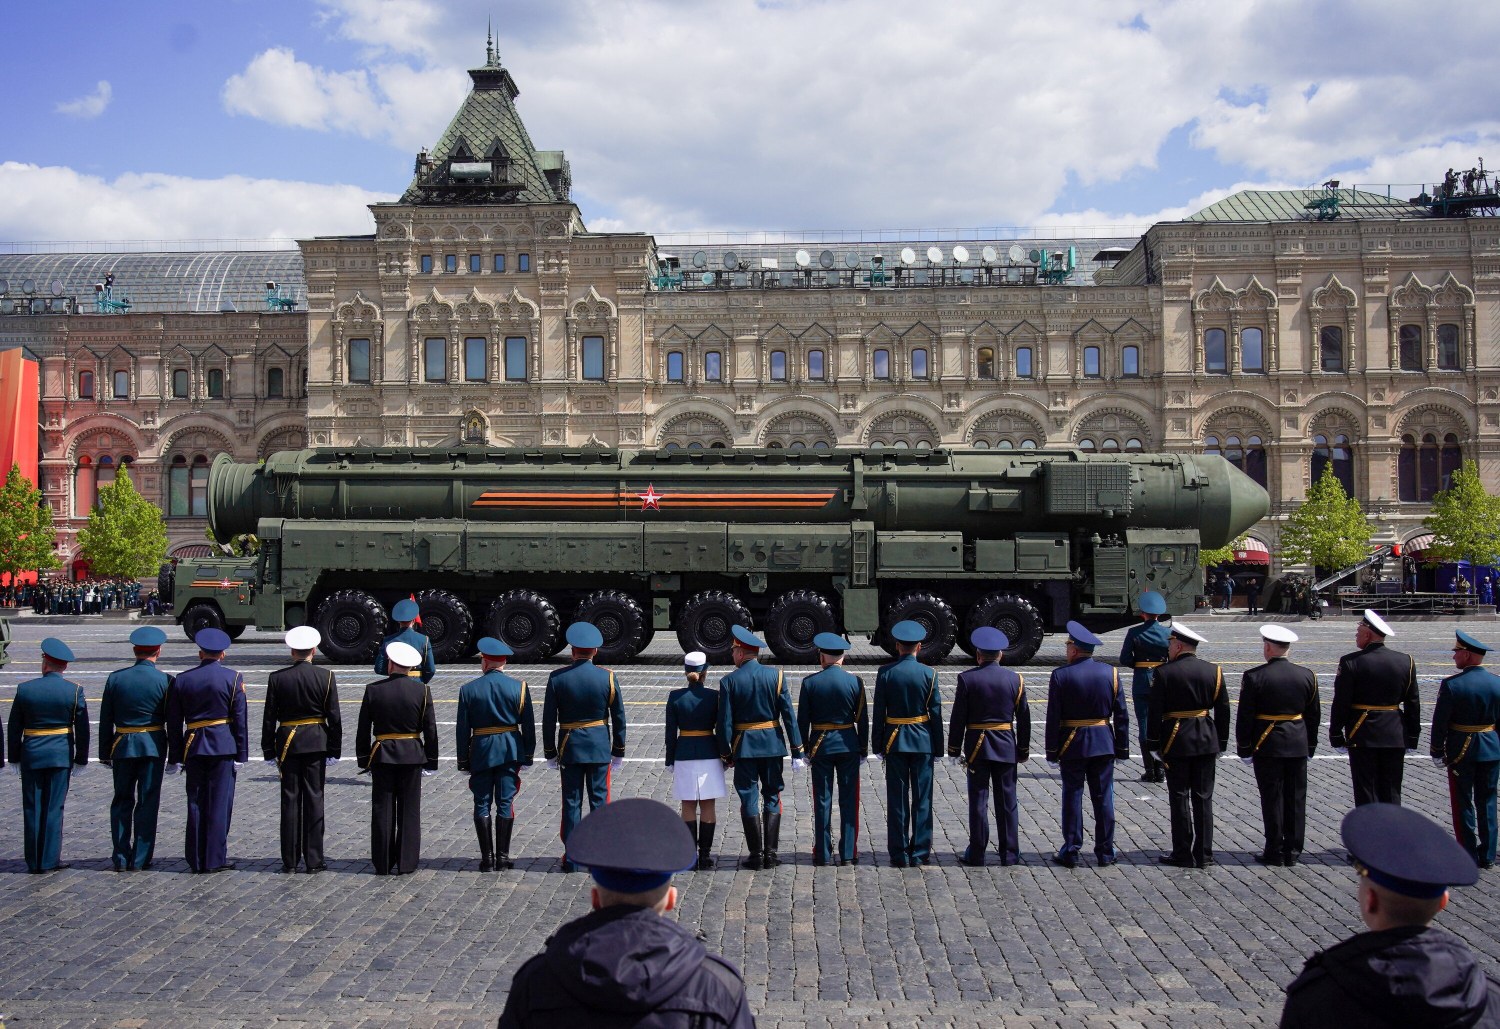 A Russian Yars intercontinental ballistic missile system drives during a military parade on Victory Day, which marks the 78th anniversary of the victory over Nazi Germany in World War Two, in Red Square in central Moscow, Russia May 9, 2023. Alexander Avilov/Moscow News Agency/Handout via REUTERS ATTENTION EDITORS - THIS IMAGE HAS BEEN SUPPLIED BY A THIRD PARTY. MANDATORY CREDIT.